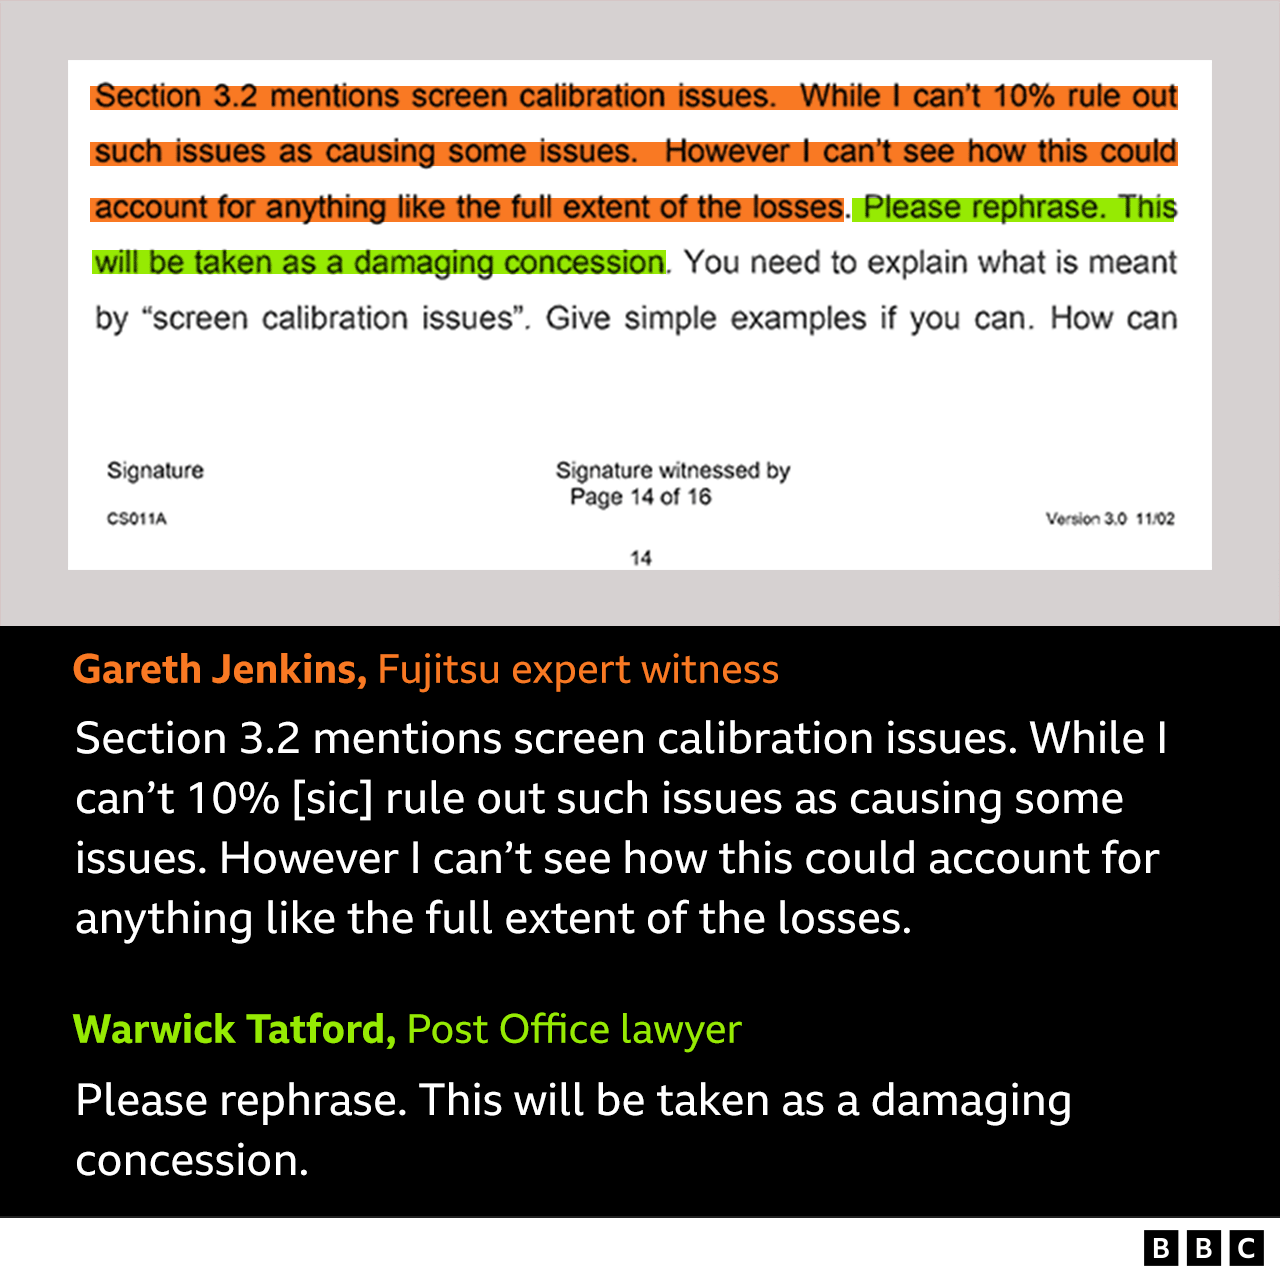 Gareth Jenkins, Fijitsu expert witness: "Section 3.2 mentions screen calibration issues. While I can't 10% [sic] rule out such issues causing some issues. However I can't see how this could account for anything like the full extent of the losses." Warwick Tatford, Post Office lawyer writes in response: "Please rephrase. This will be taken as a damaging concession."